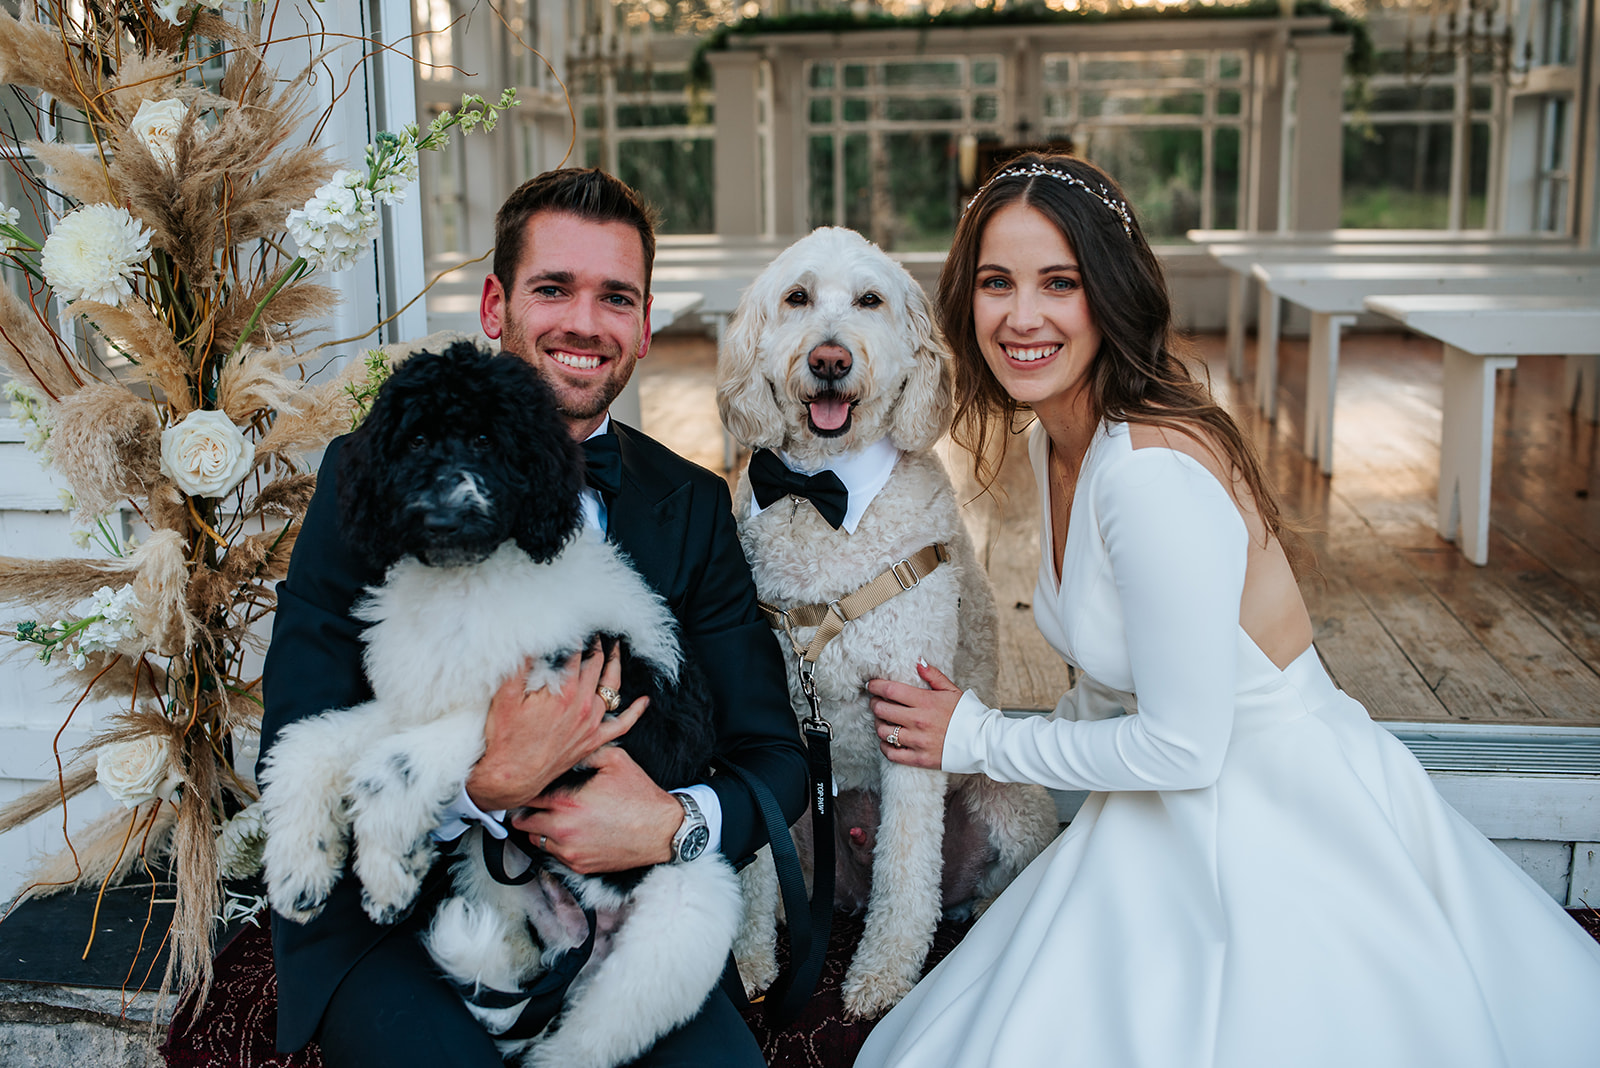 The bride and groom smile and sit with their two dogs outside on the altar after their winter wedding in Aggieland at 7F Lodge.